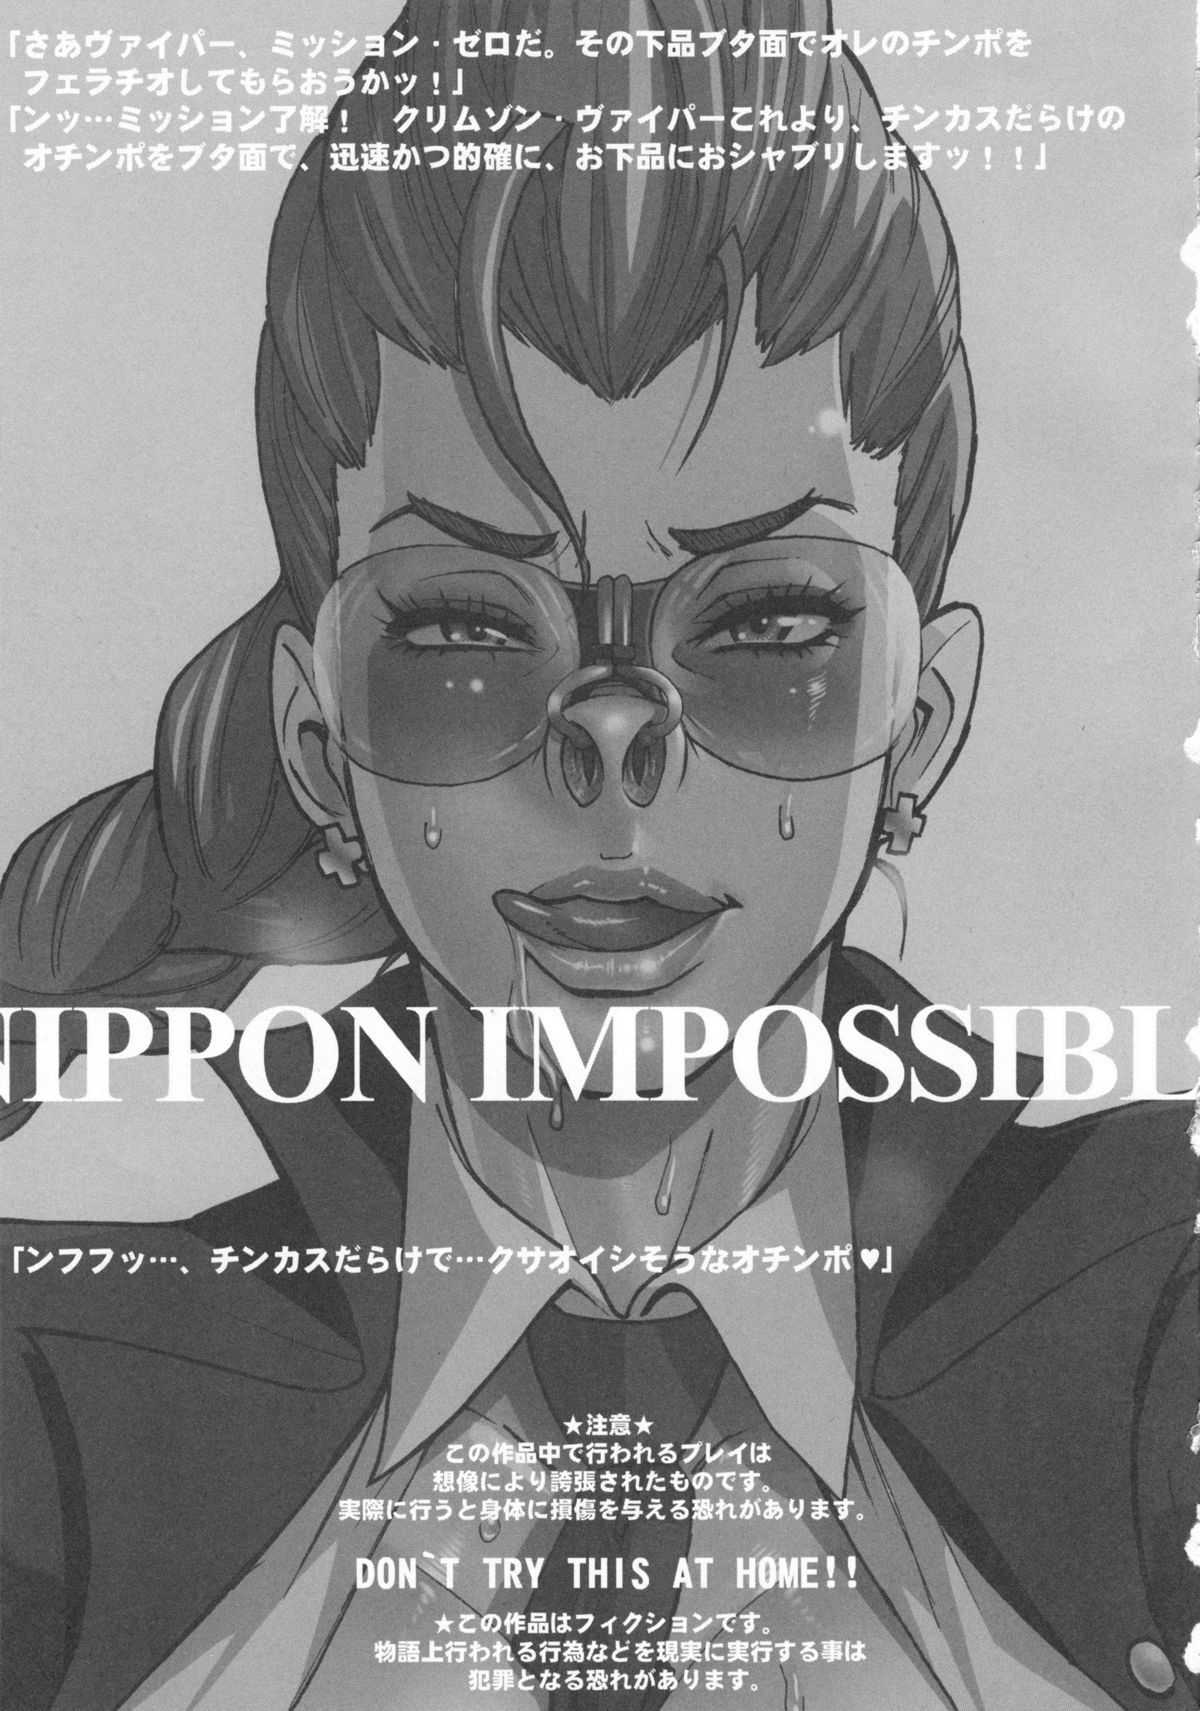 Nipponsei Impossible [ENG Sub/Uncensored] 